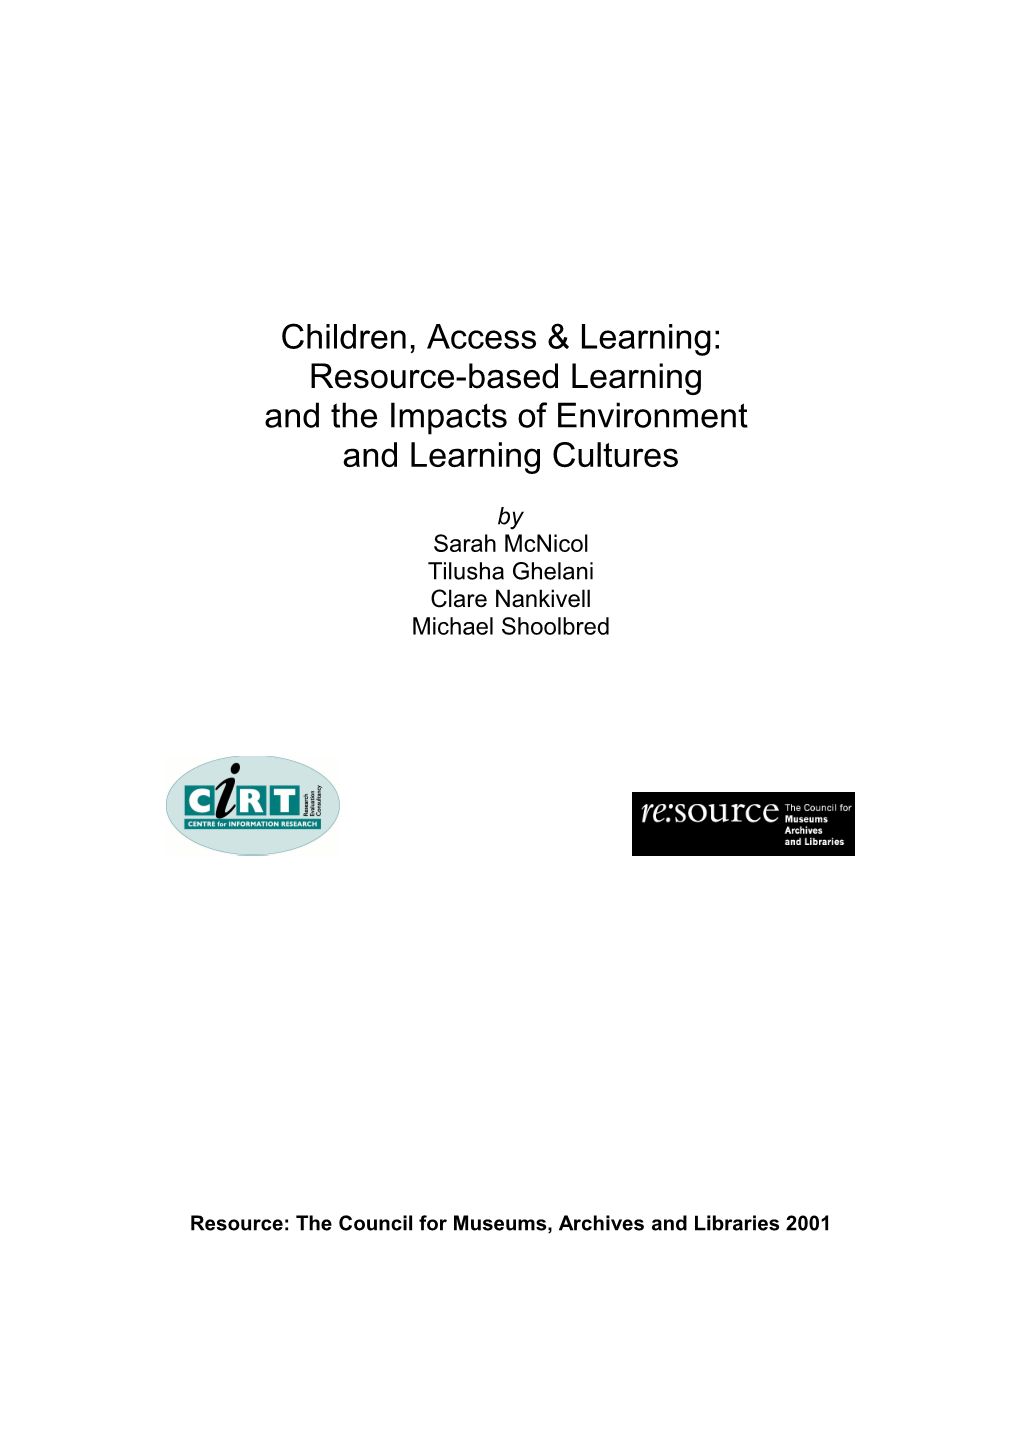 Children, Access & Learning